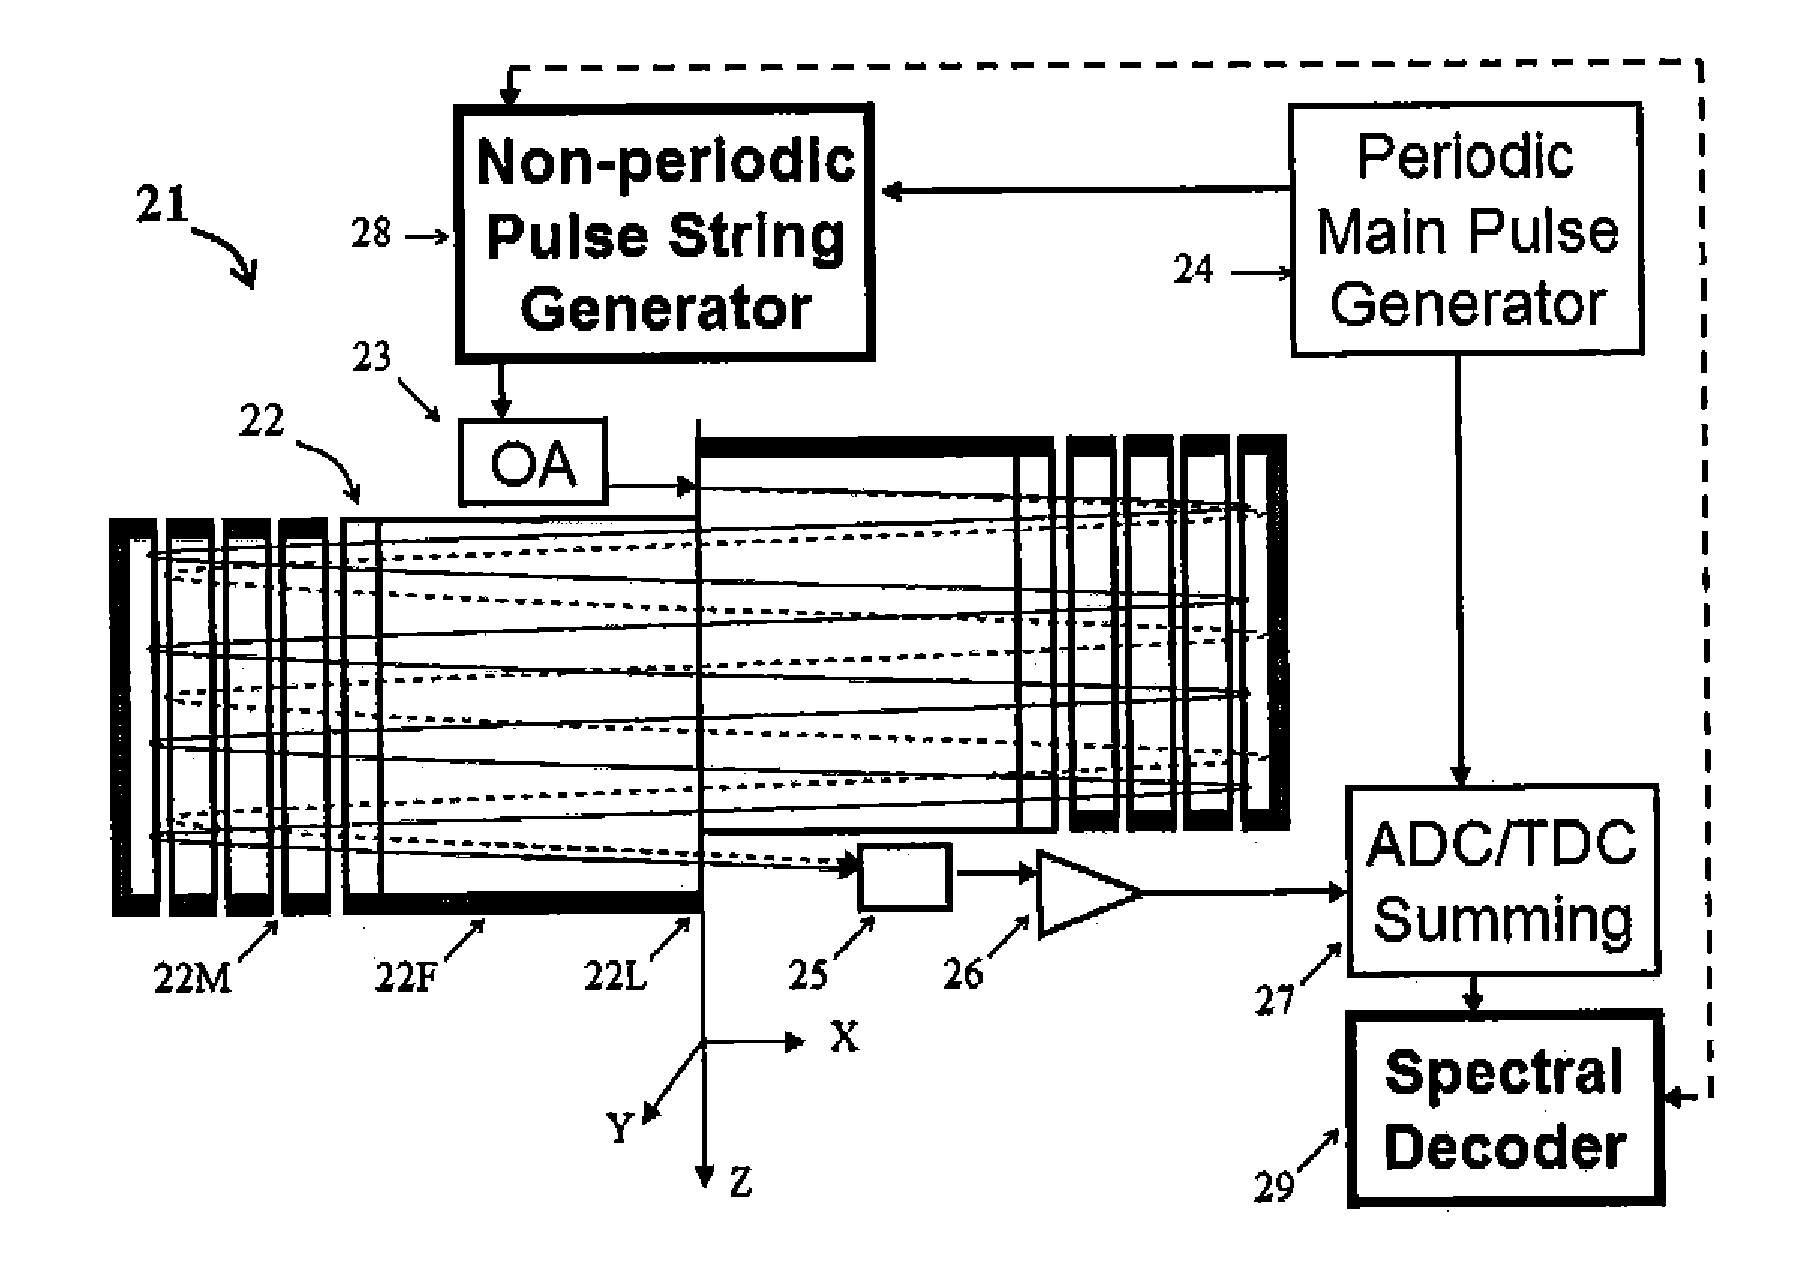 Electrostatic Mass Spectrometer with Encoded Frequent Pulses